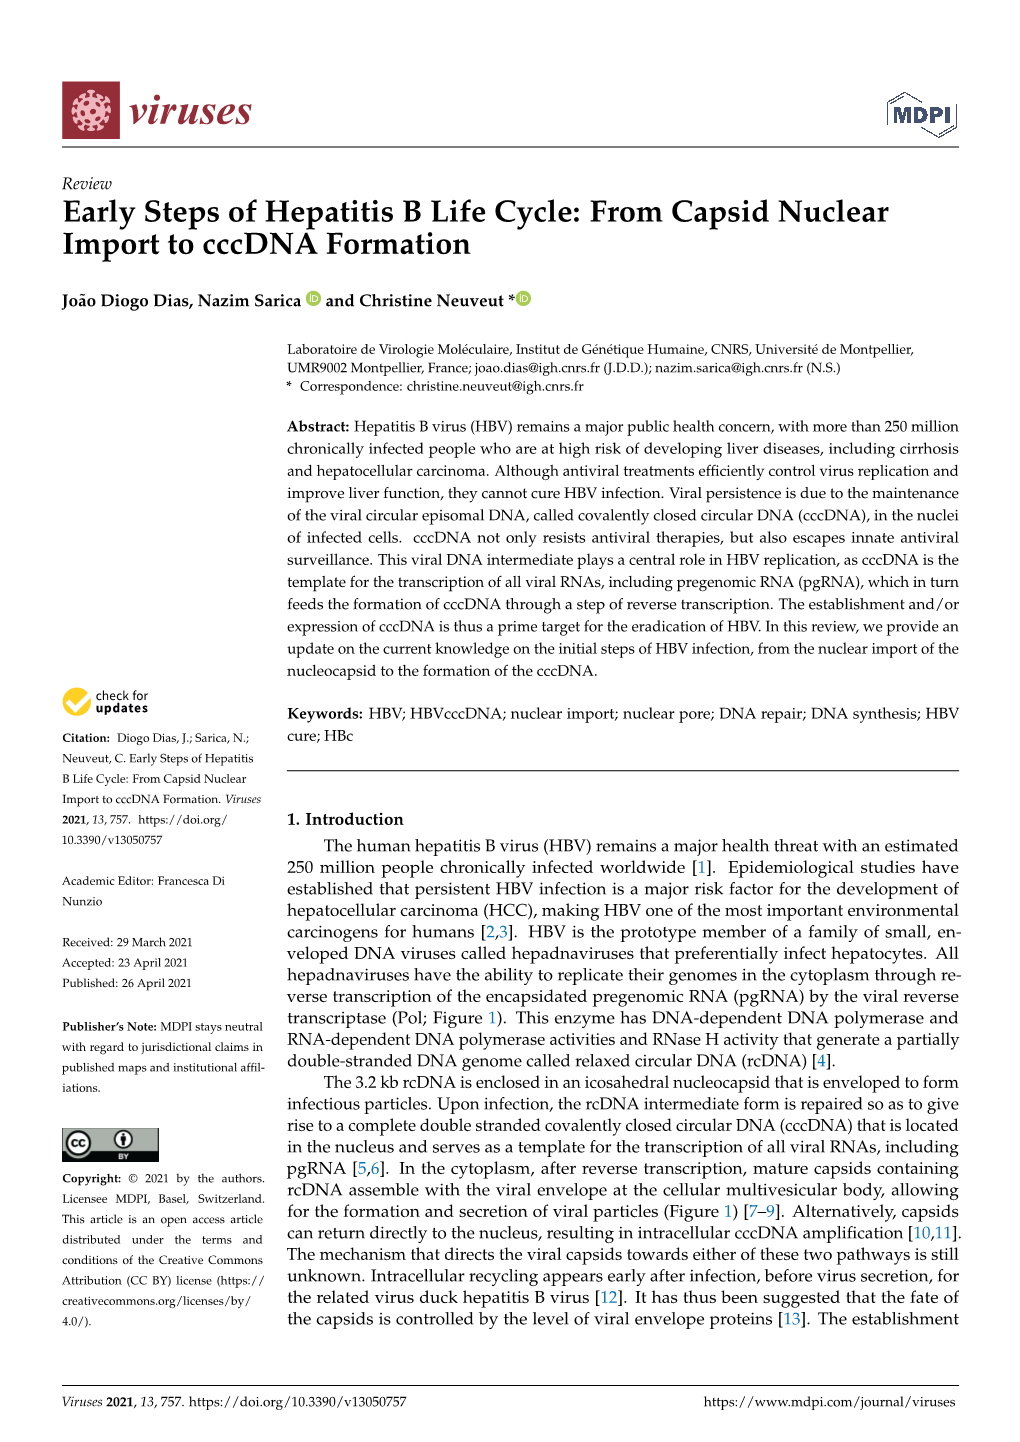 From Capsid Nuclear Import to Cccdna Formation